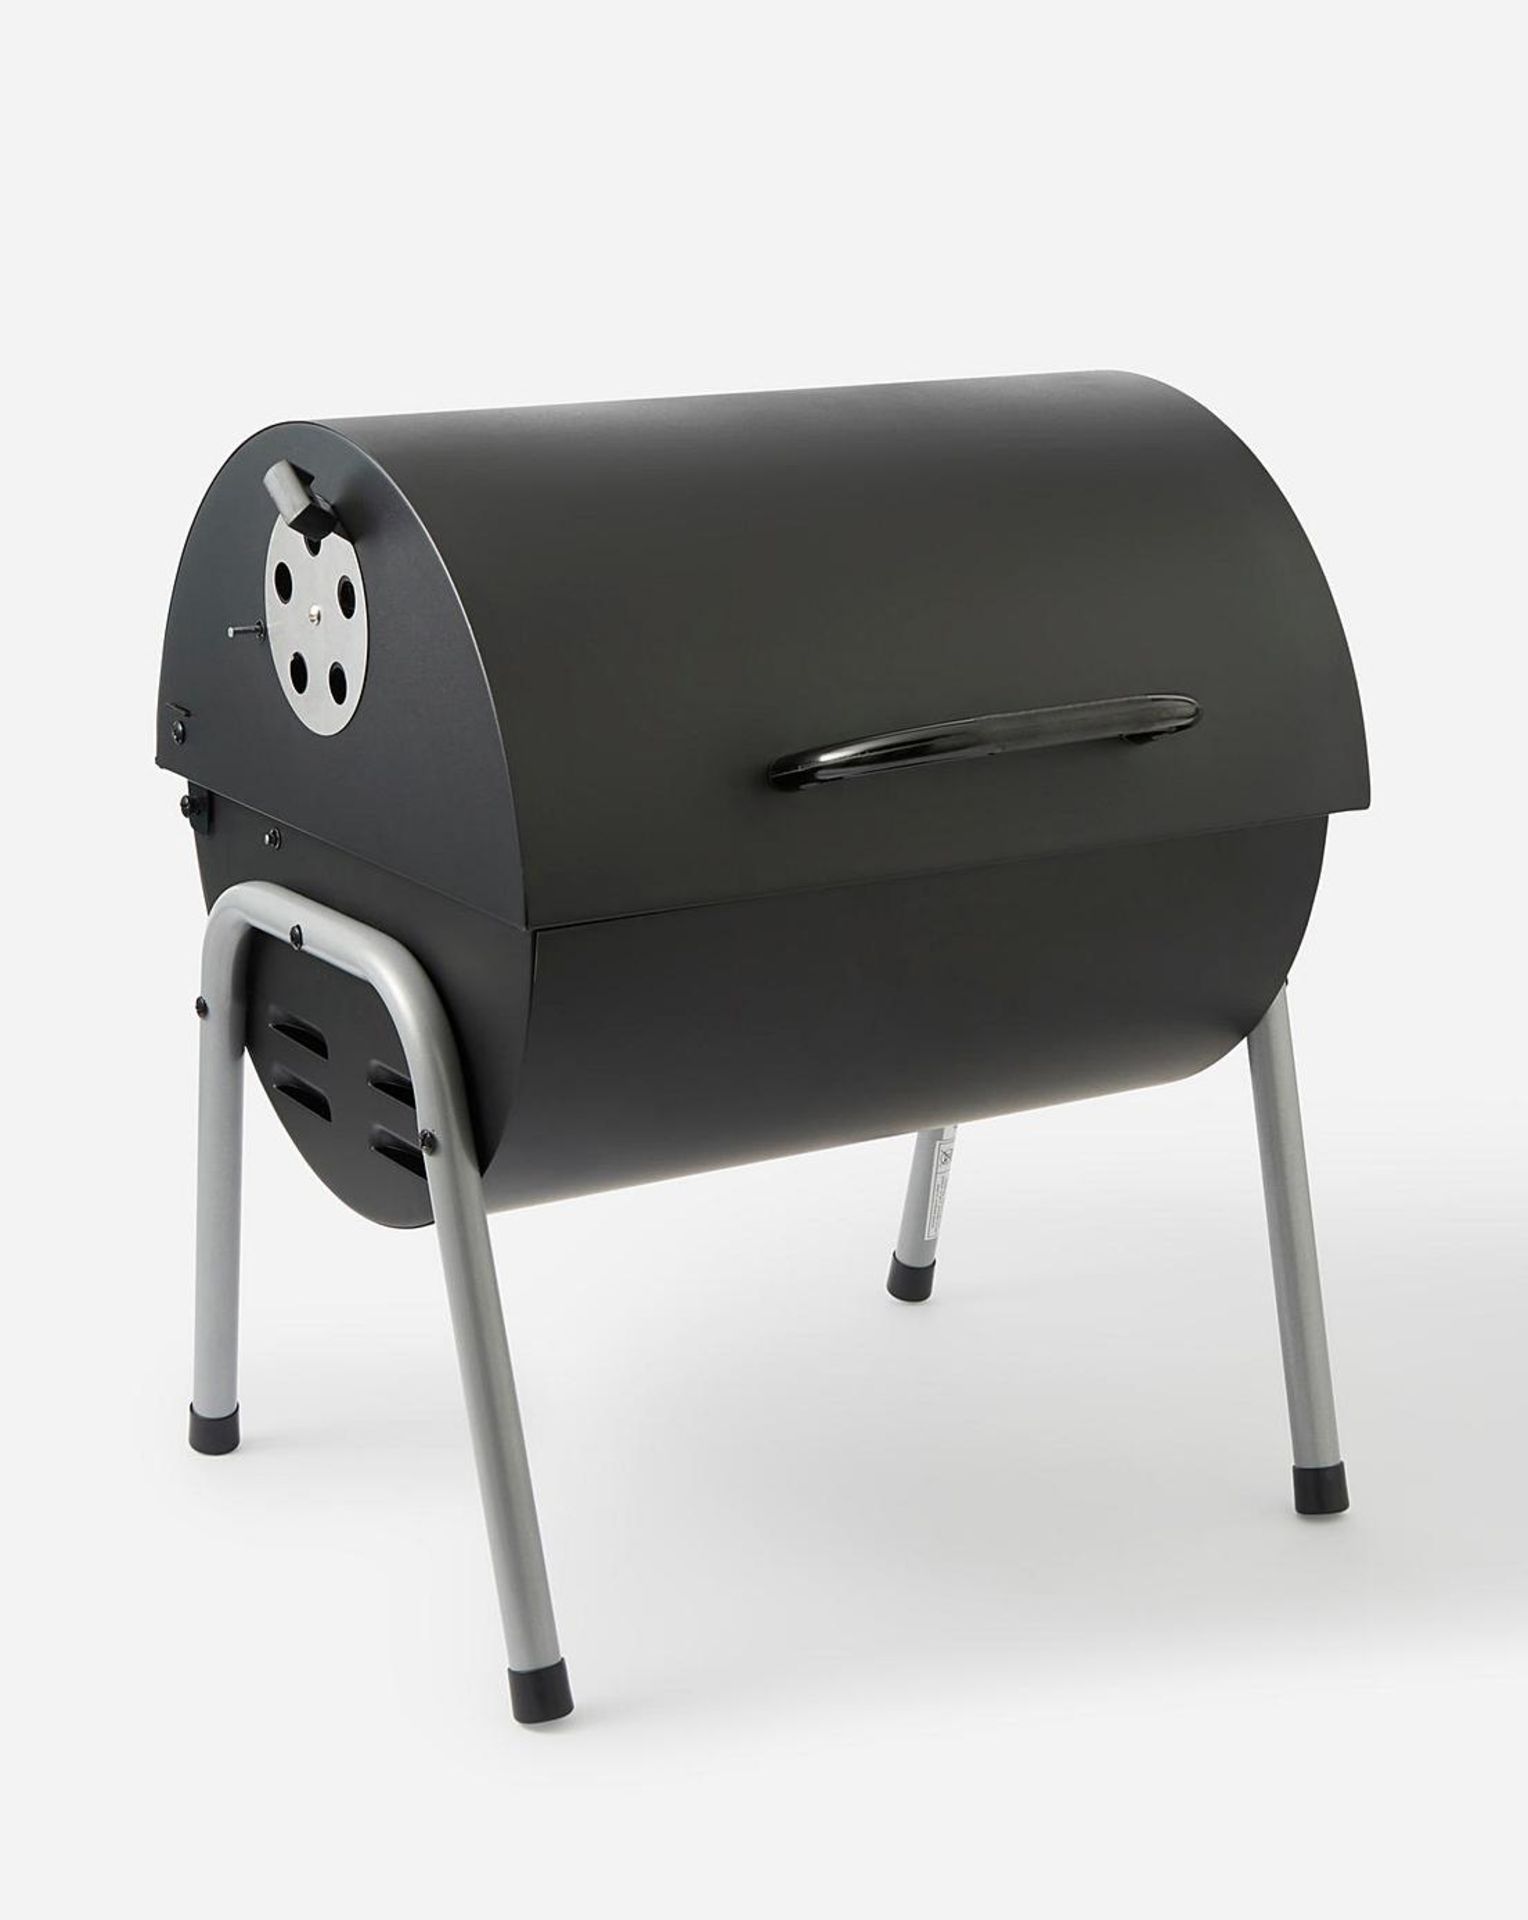 3x BRAND NEW Tabletop Oil Drum Barbeque Grill. RRP £59.99 EACH. Black steel firebowl with enamel - Bild 3 aus 4